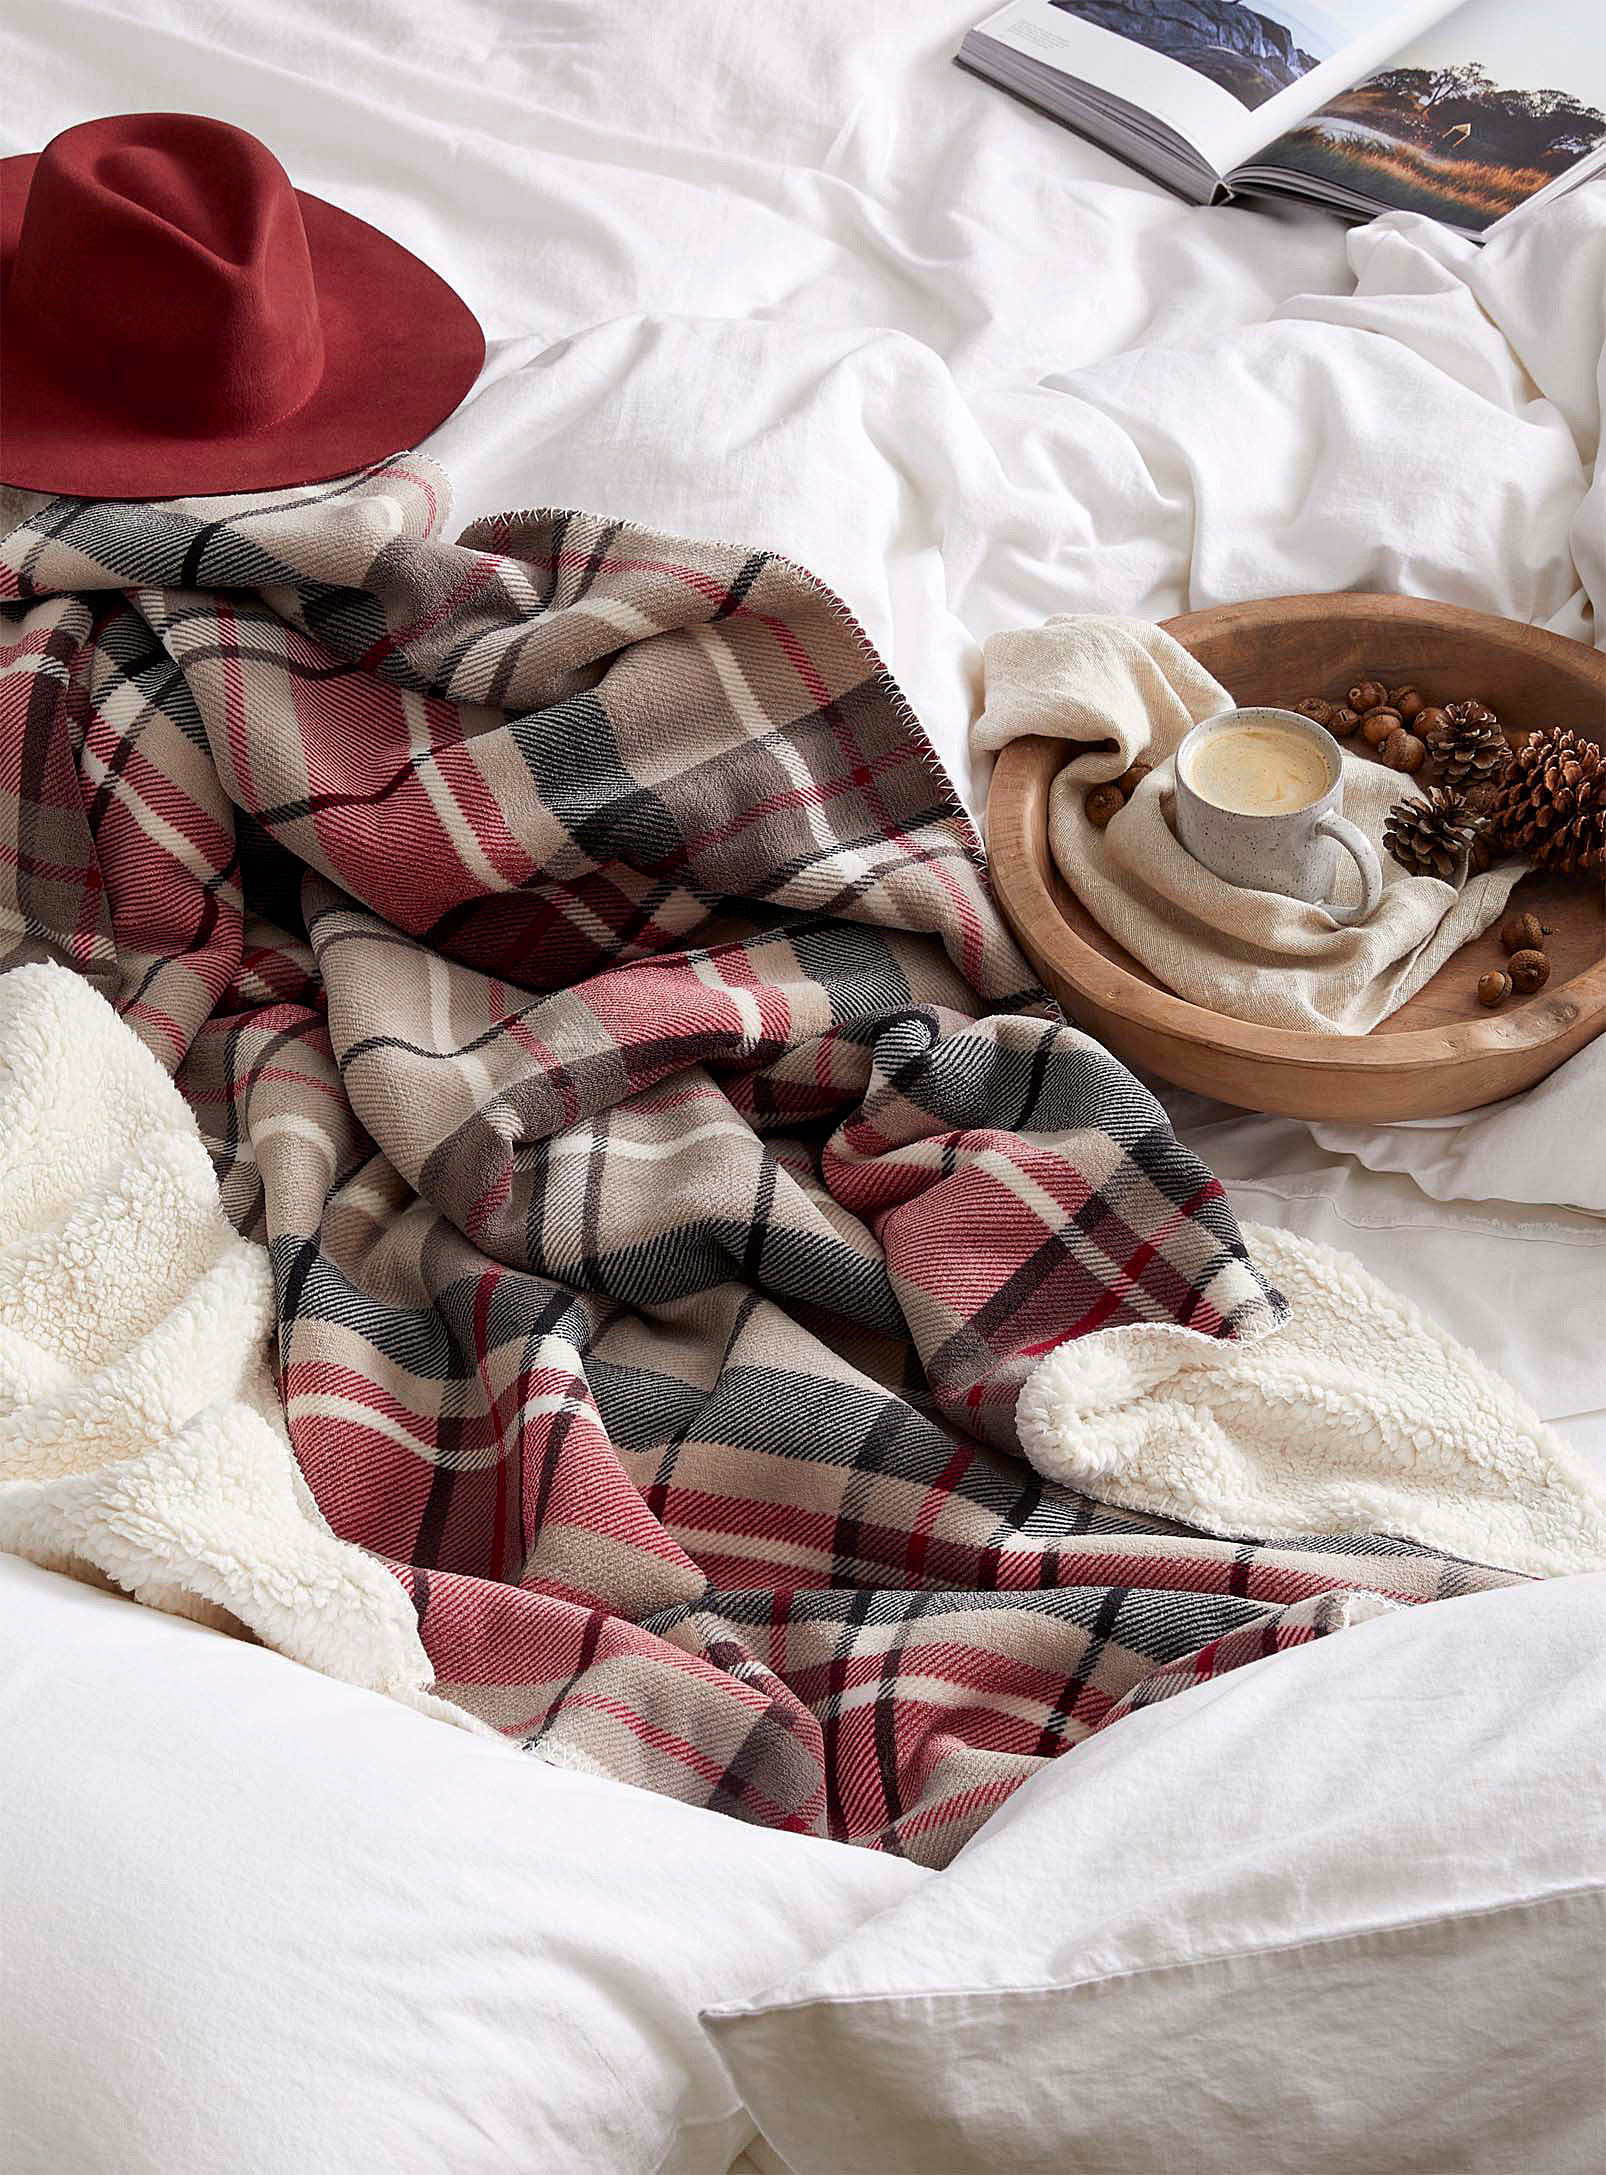 A rumpled fleece blanket on a bed next to a wooden tray with food